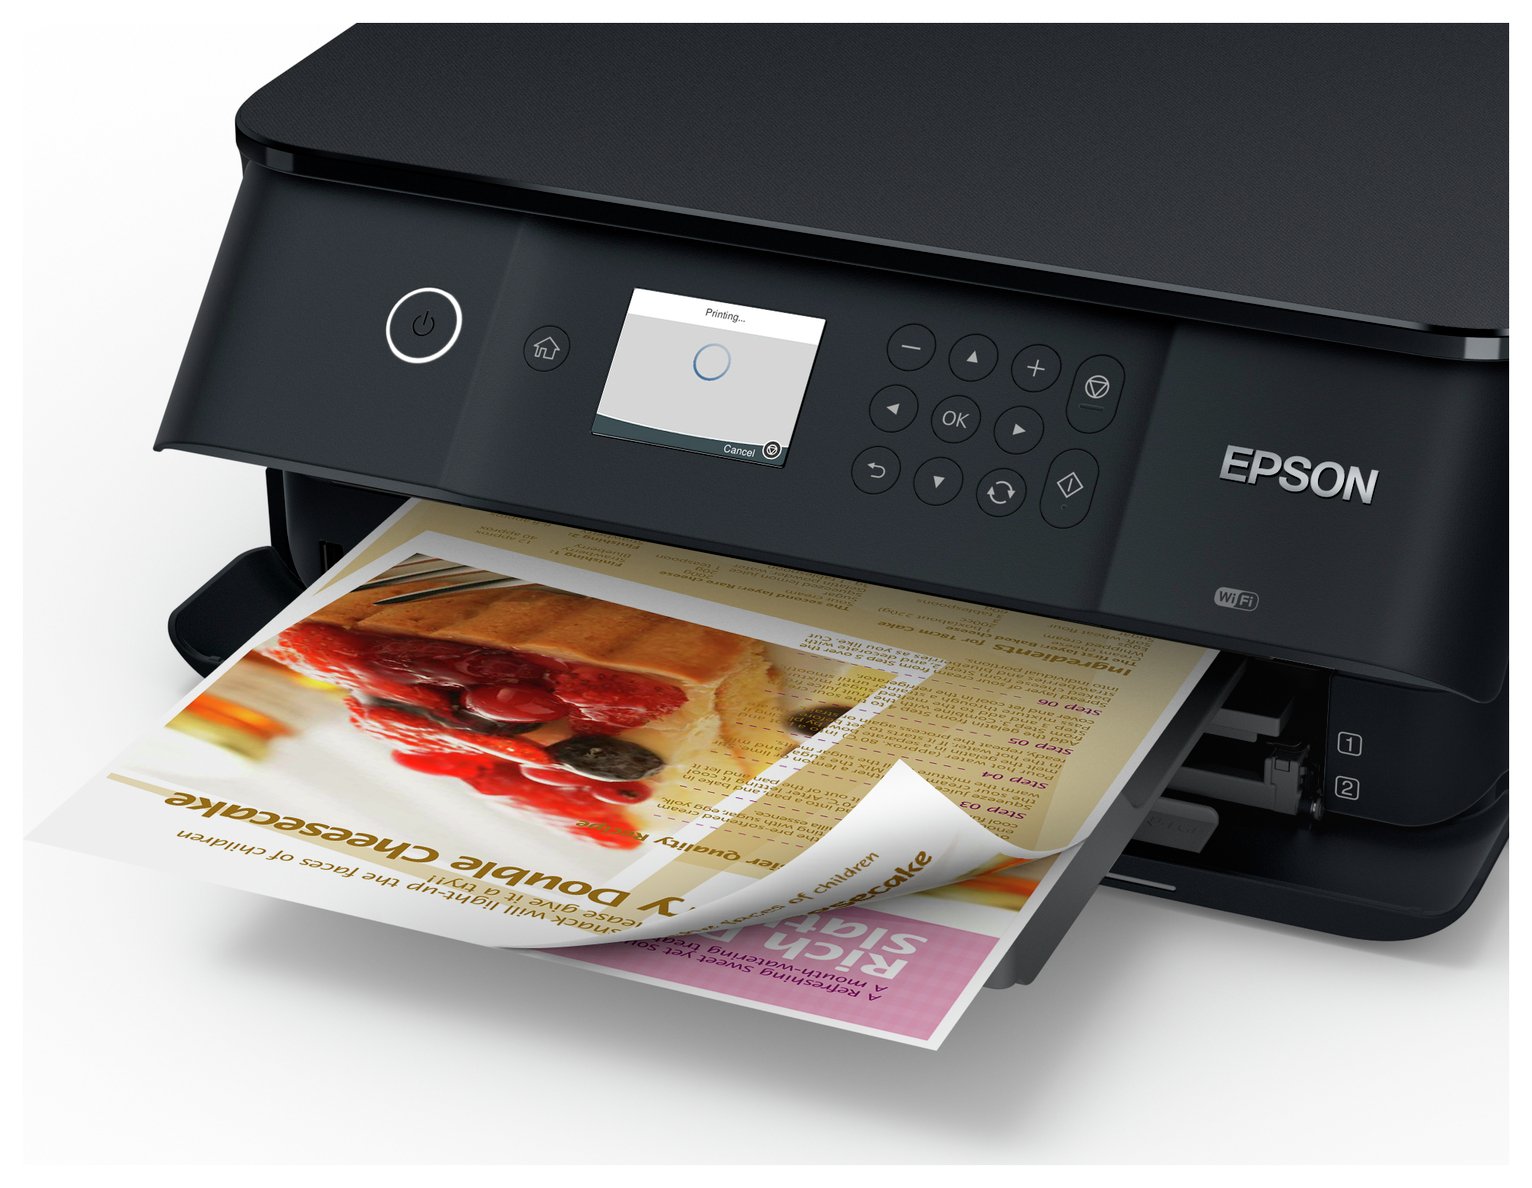 Epson Expression Premium Xp 6000 All In One Wireless Printer Reviews 4166